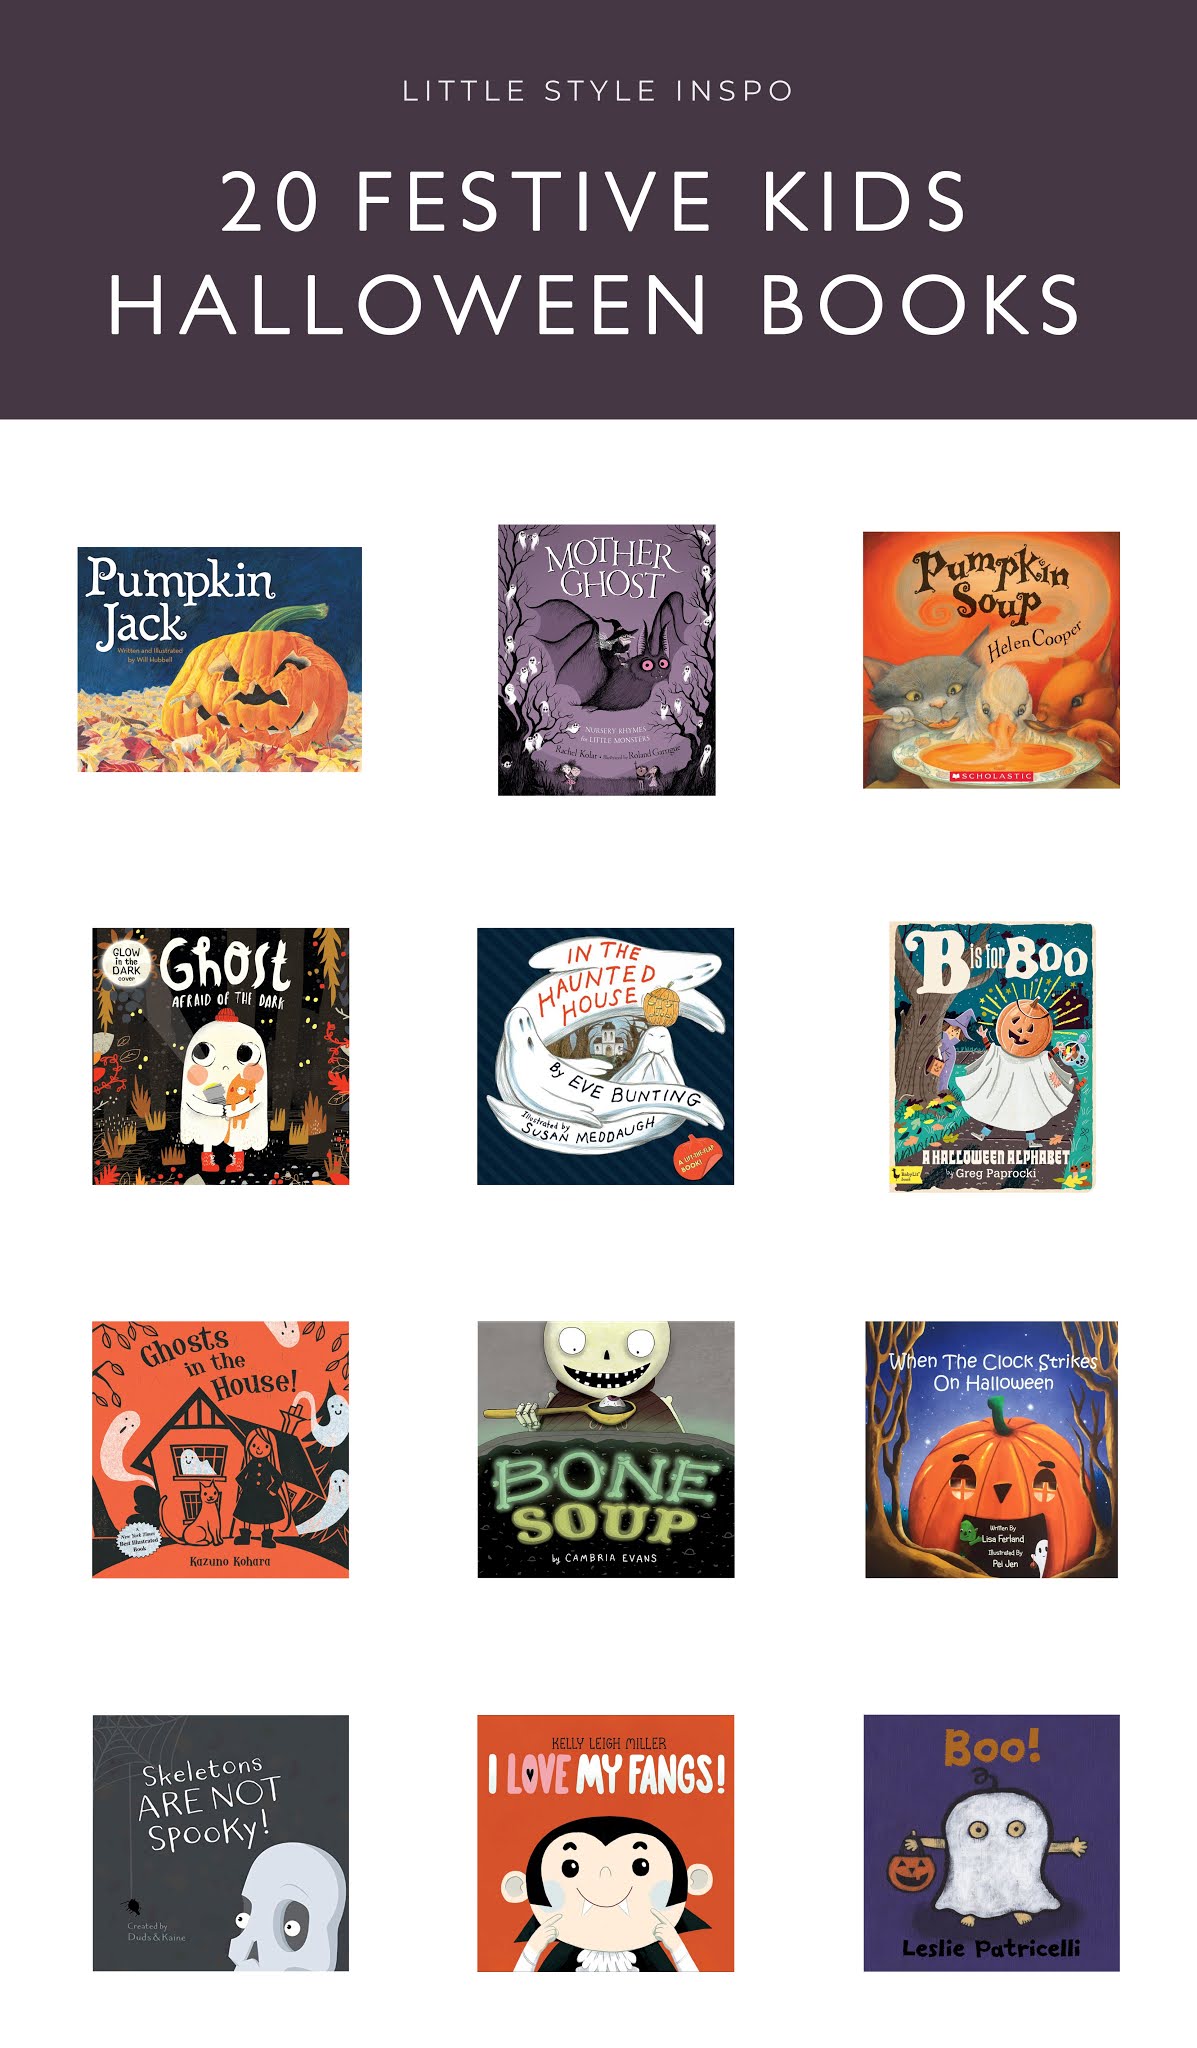 A round-up of 20 halloween books for kids